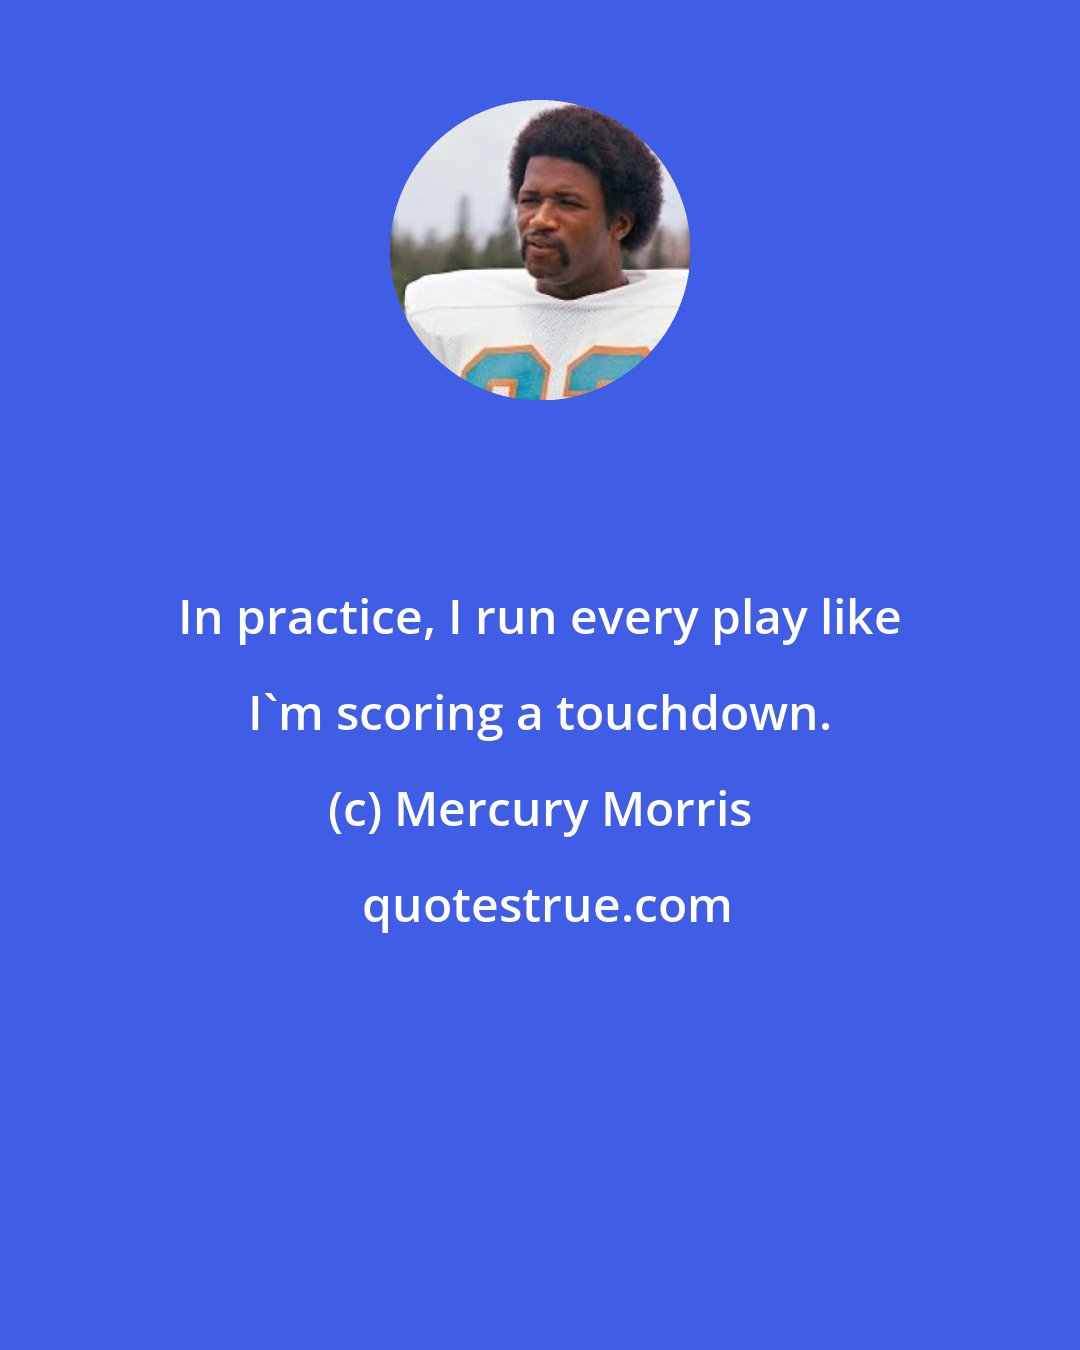 Mercury Morris: In practice, I run every play like I'm scoring a touchdown.